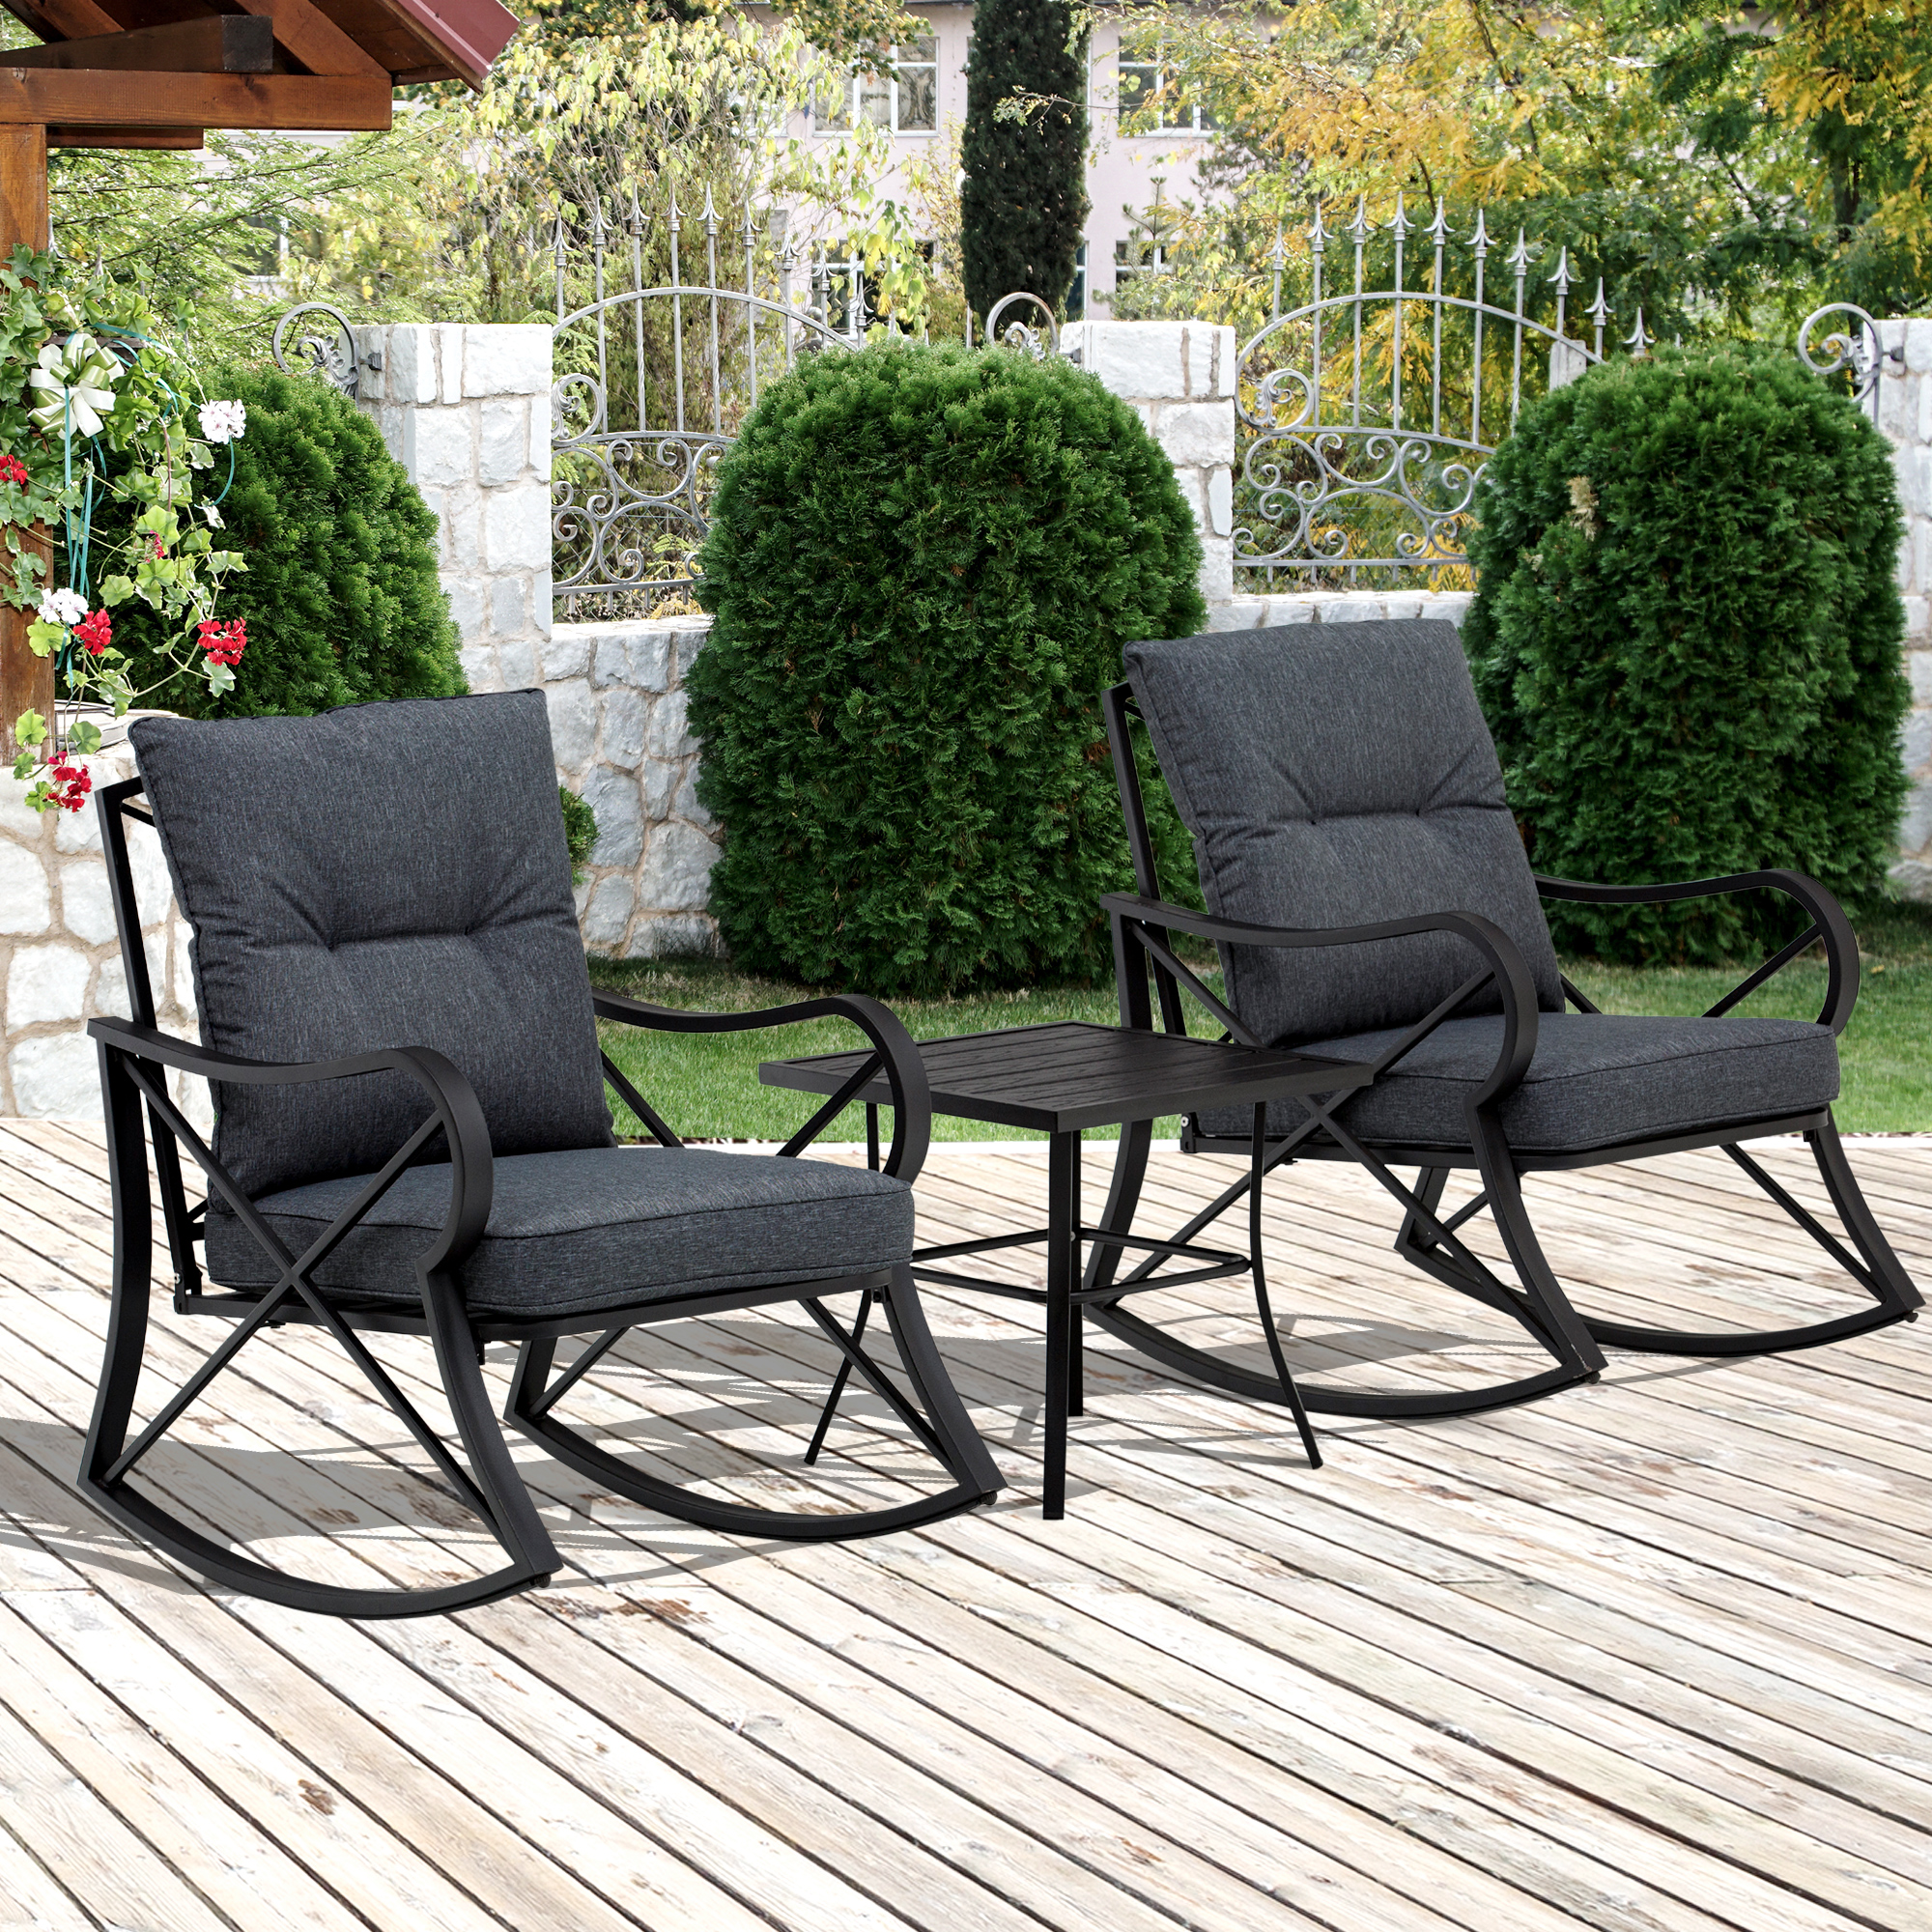 Outsunny 3-Piece Patio Bistro Set Outdoor Rocking Coffee Table Chair Set with Curved Base, Soft Cushions, Steel Frame, Black - image 2 of 9